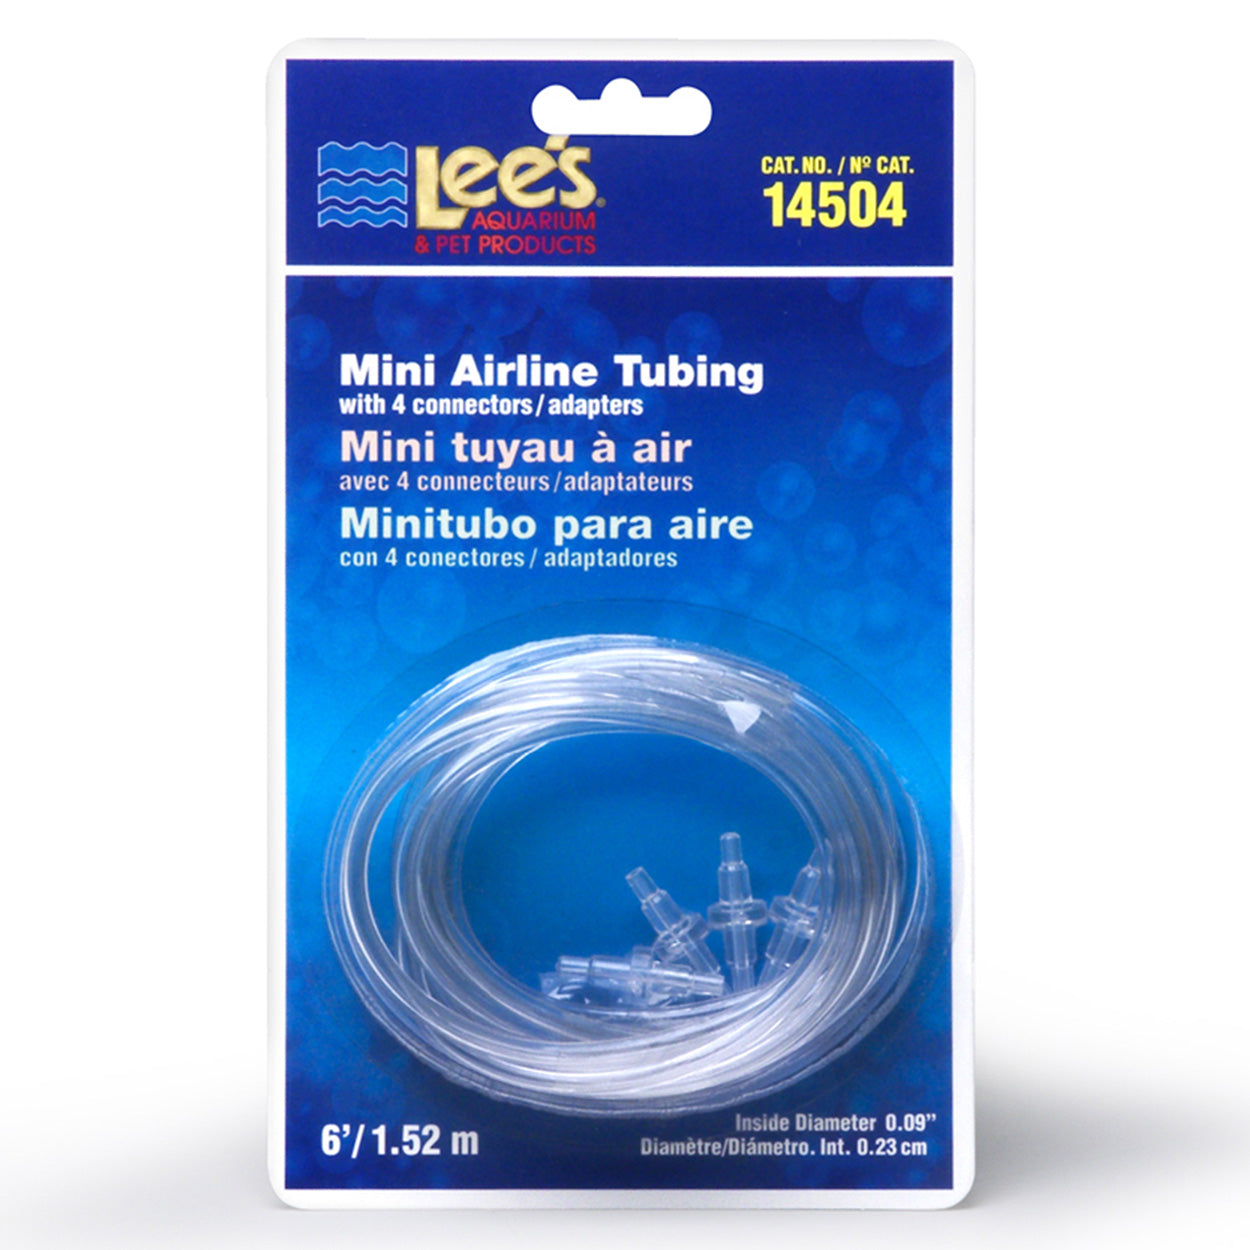 Lee's Mini Airline Tubing - 6 ft